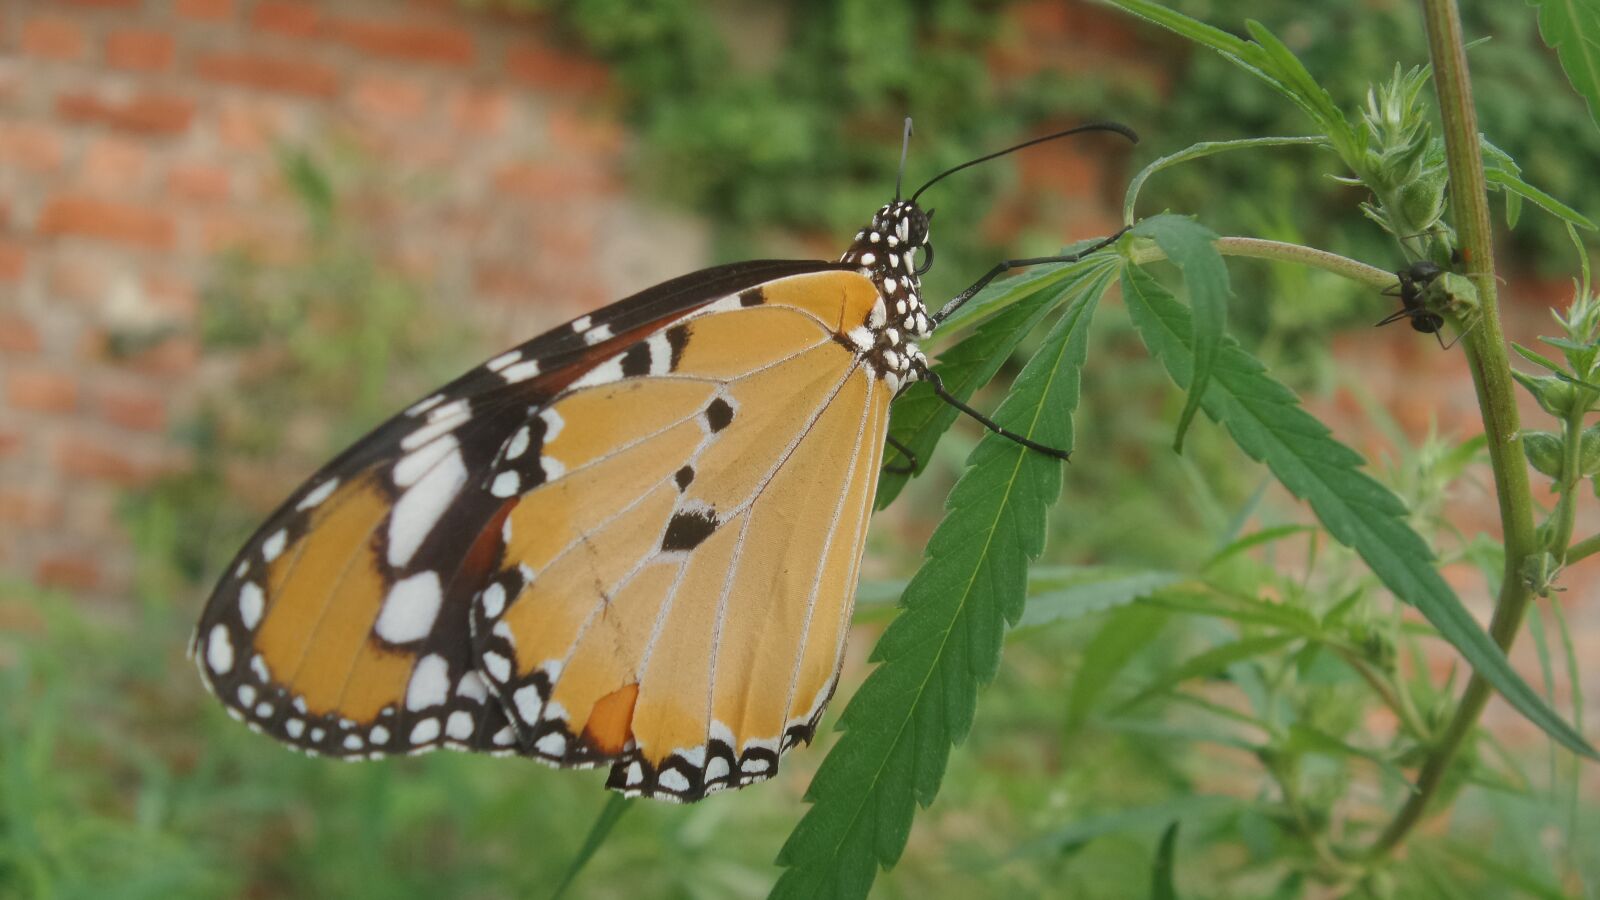 Samsung Galaxy K Zoom sample photo. Butterfly, insect, nature photography